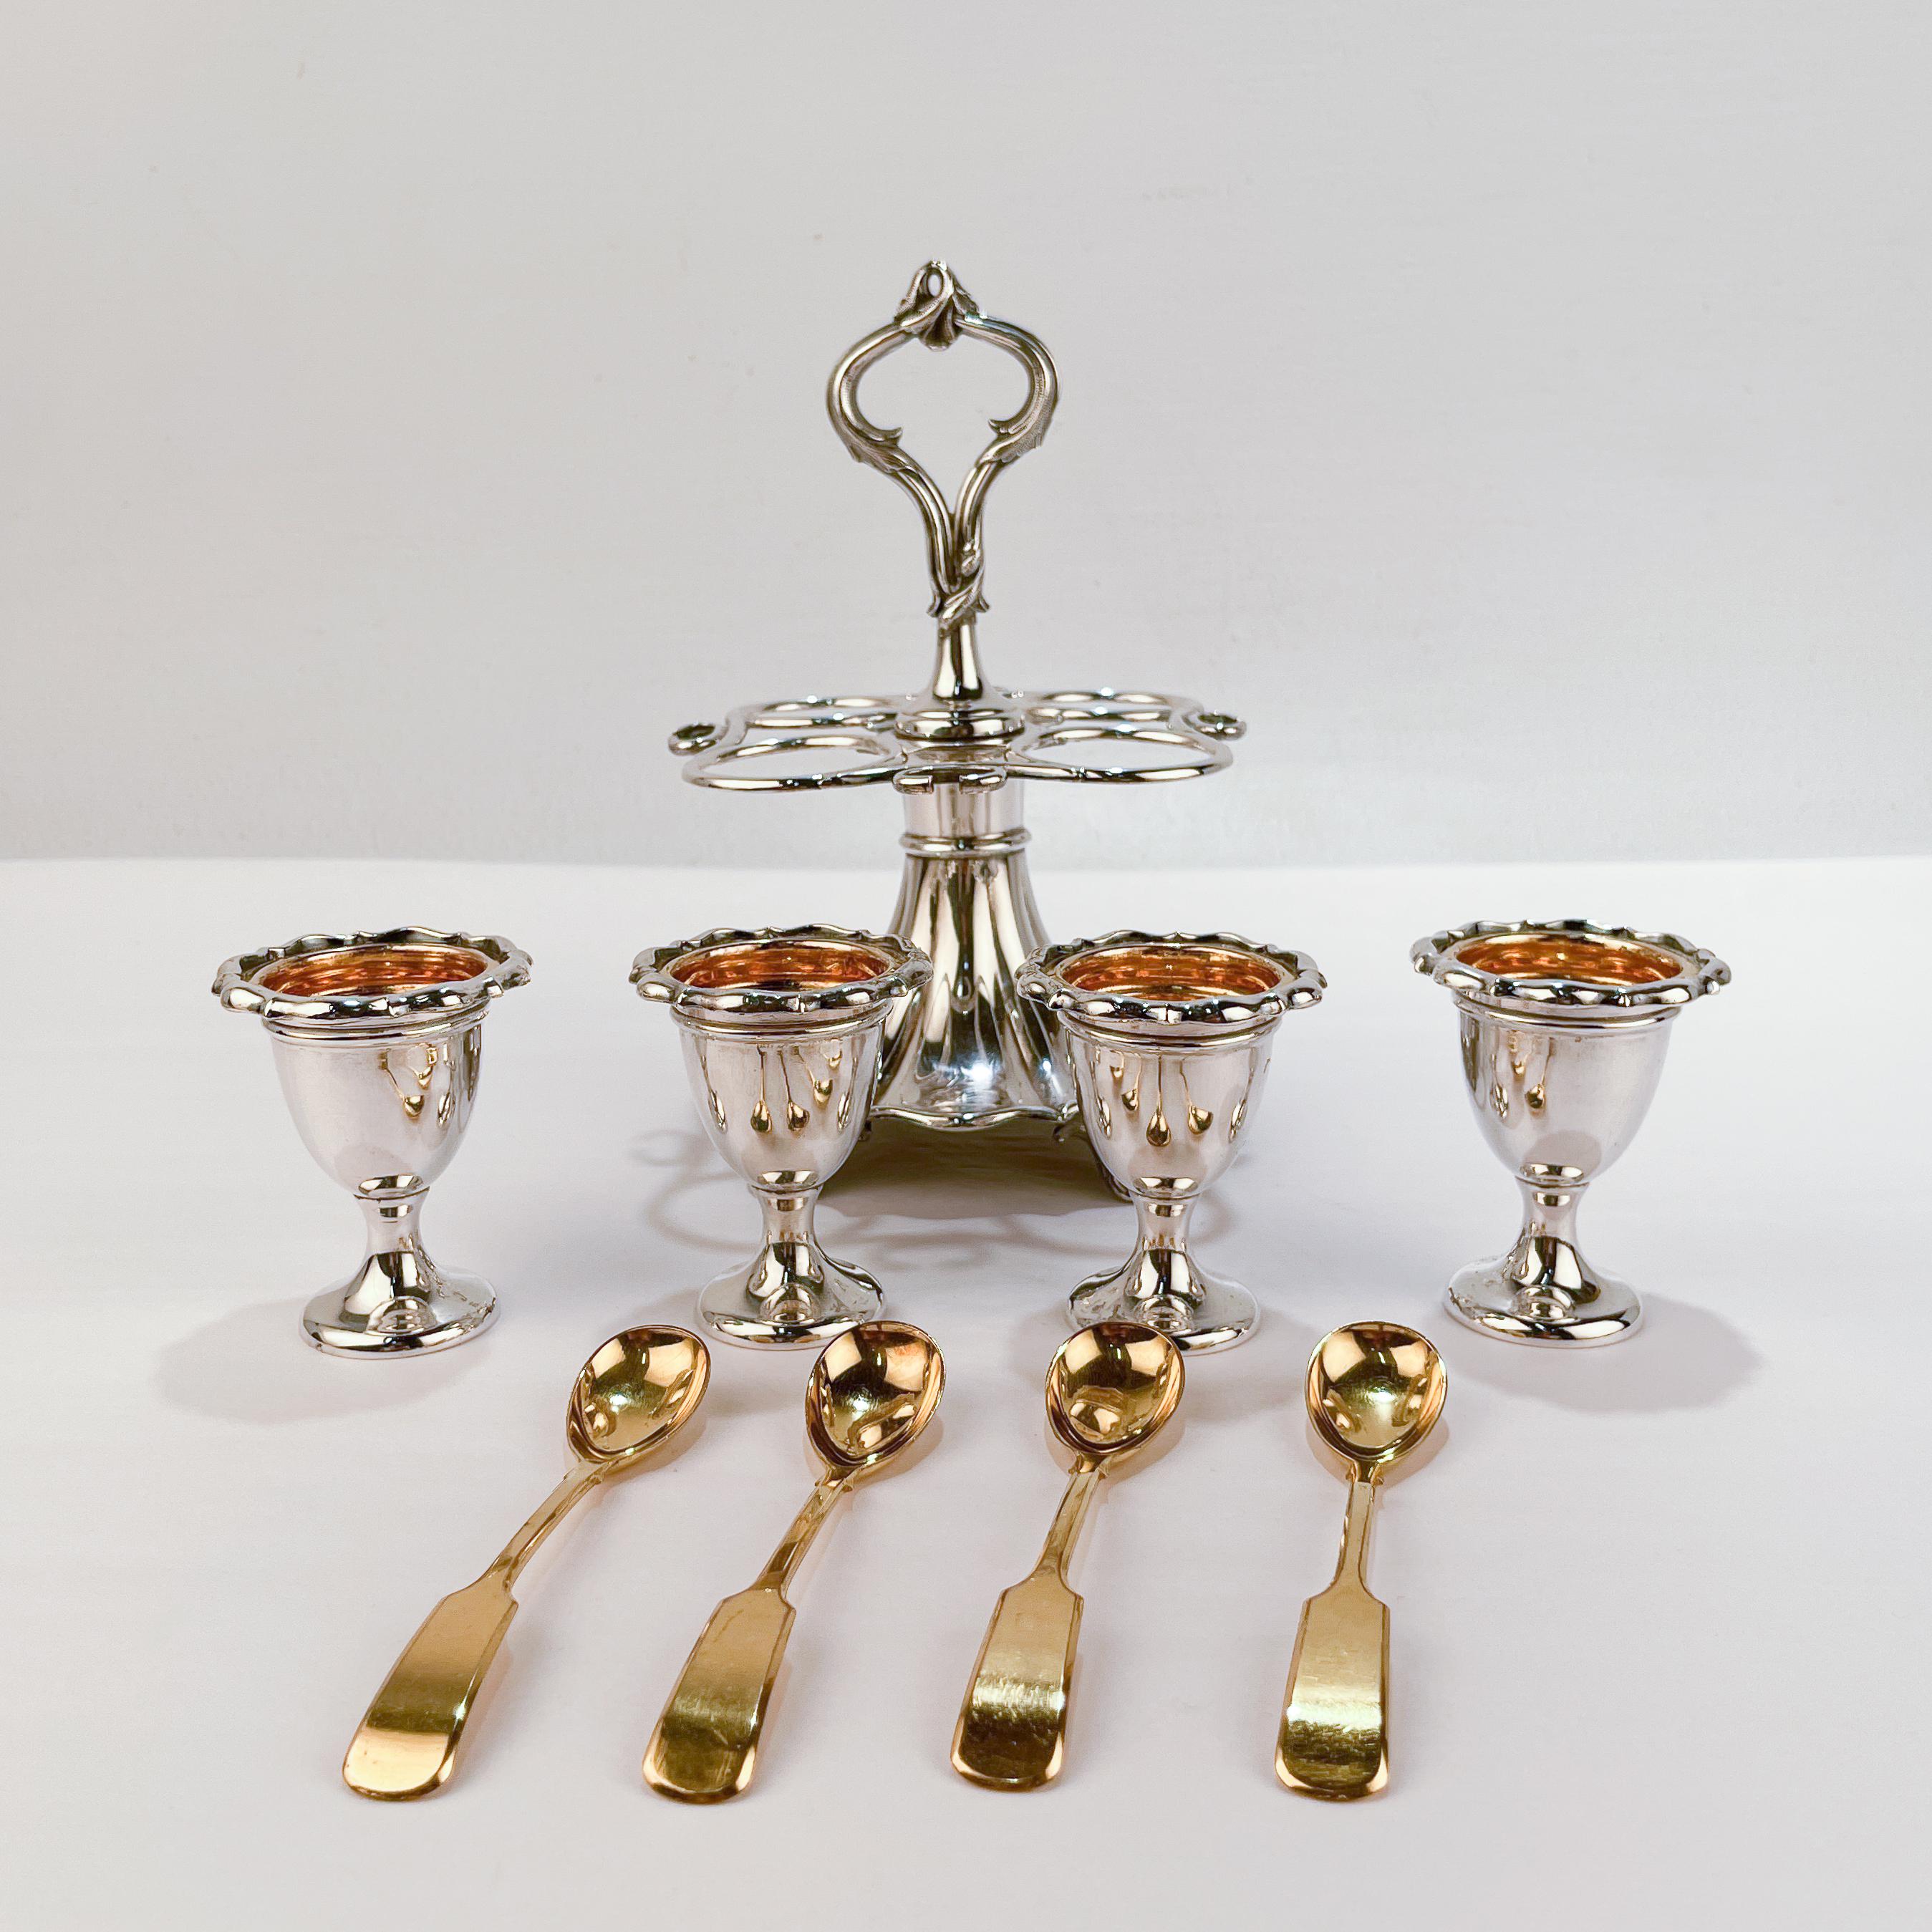 Antique 19th Century English Silver Plated Egg Cups and Stand For Sale 3